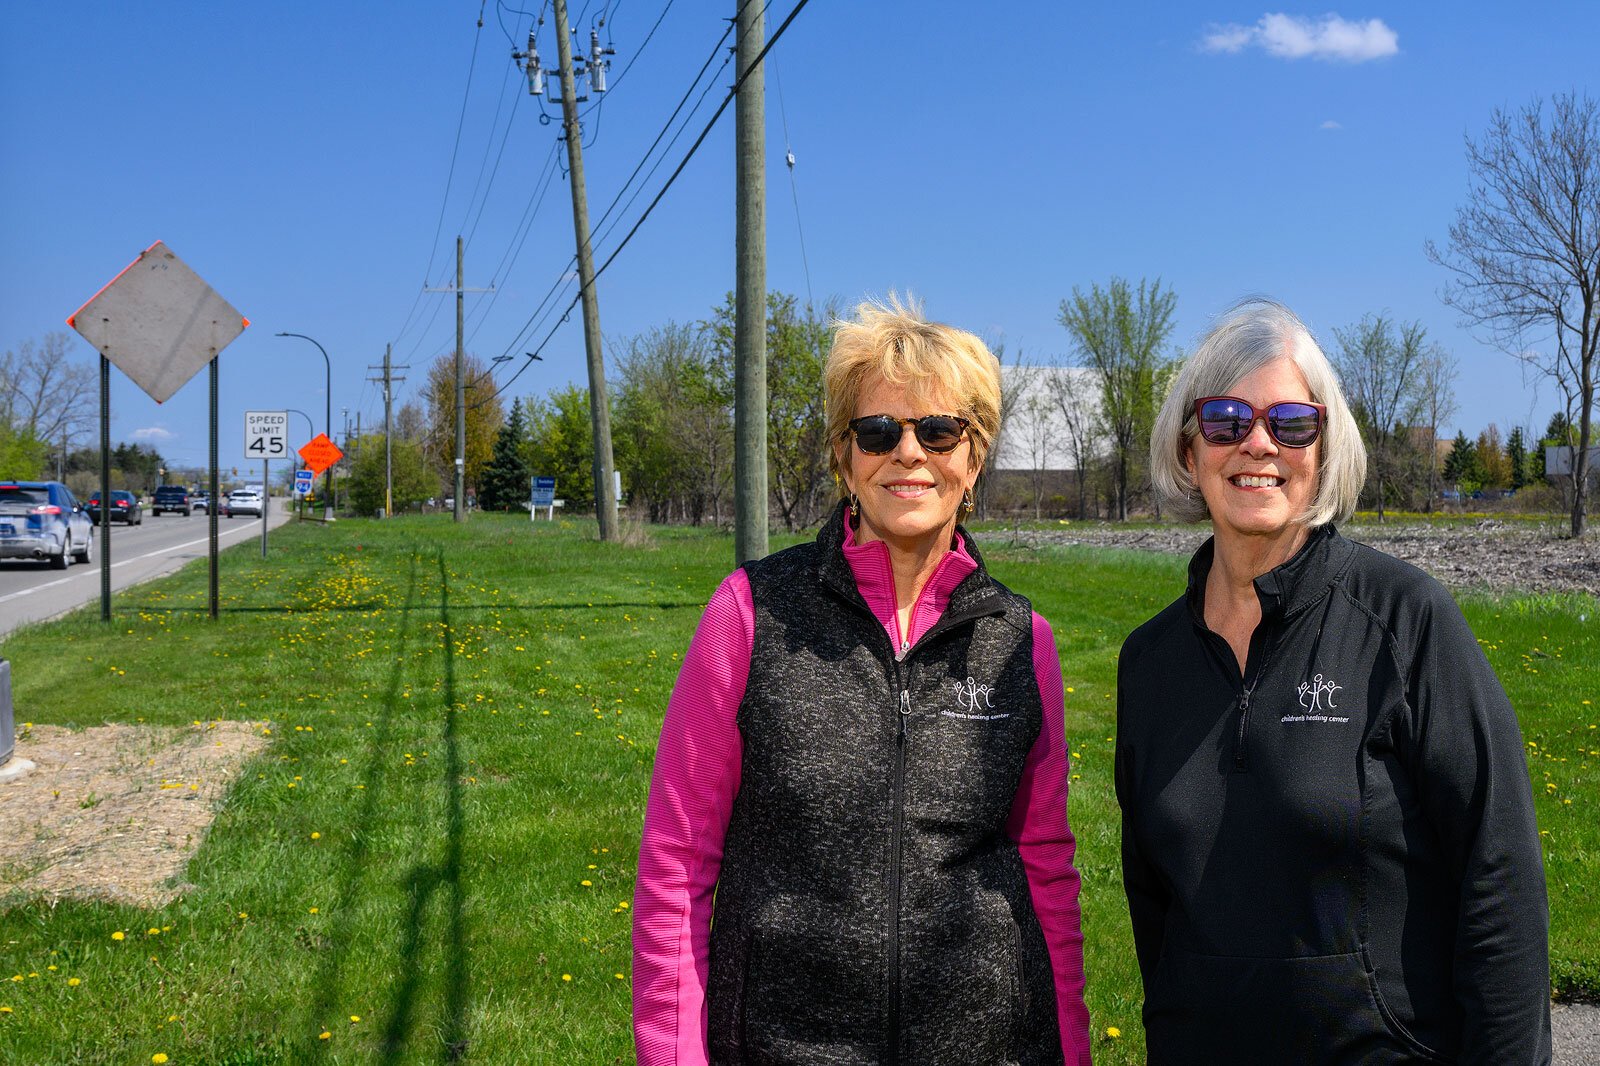 Julie Piazza and Lorrie Beaumont at the future location of the Children's Healing Center in Ypsilanti Township.